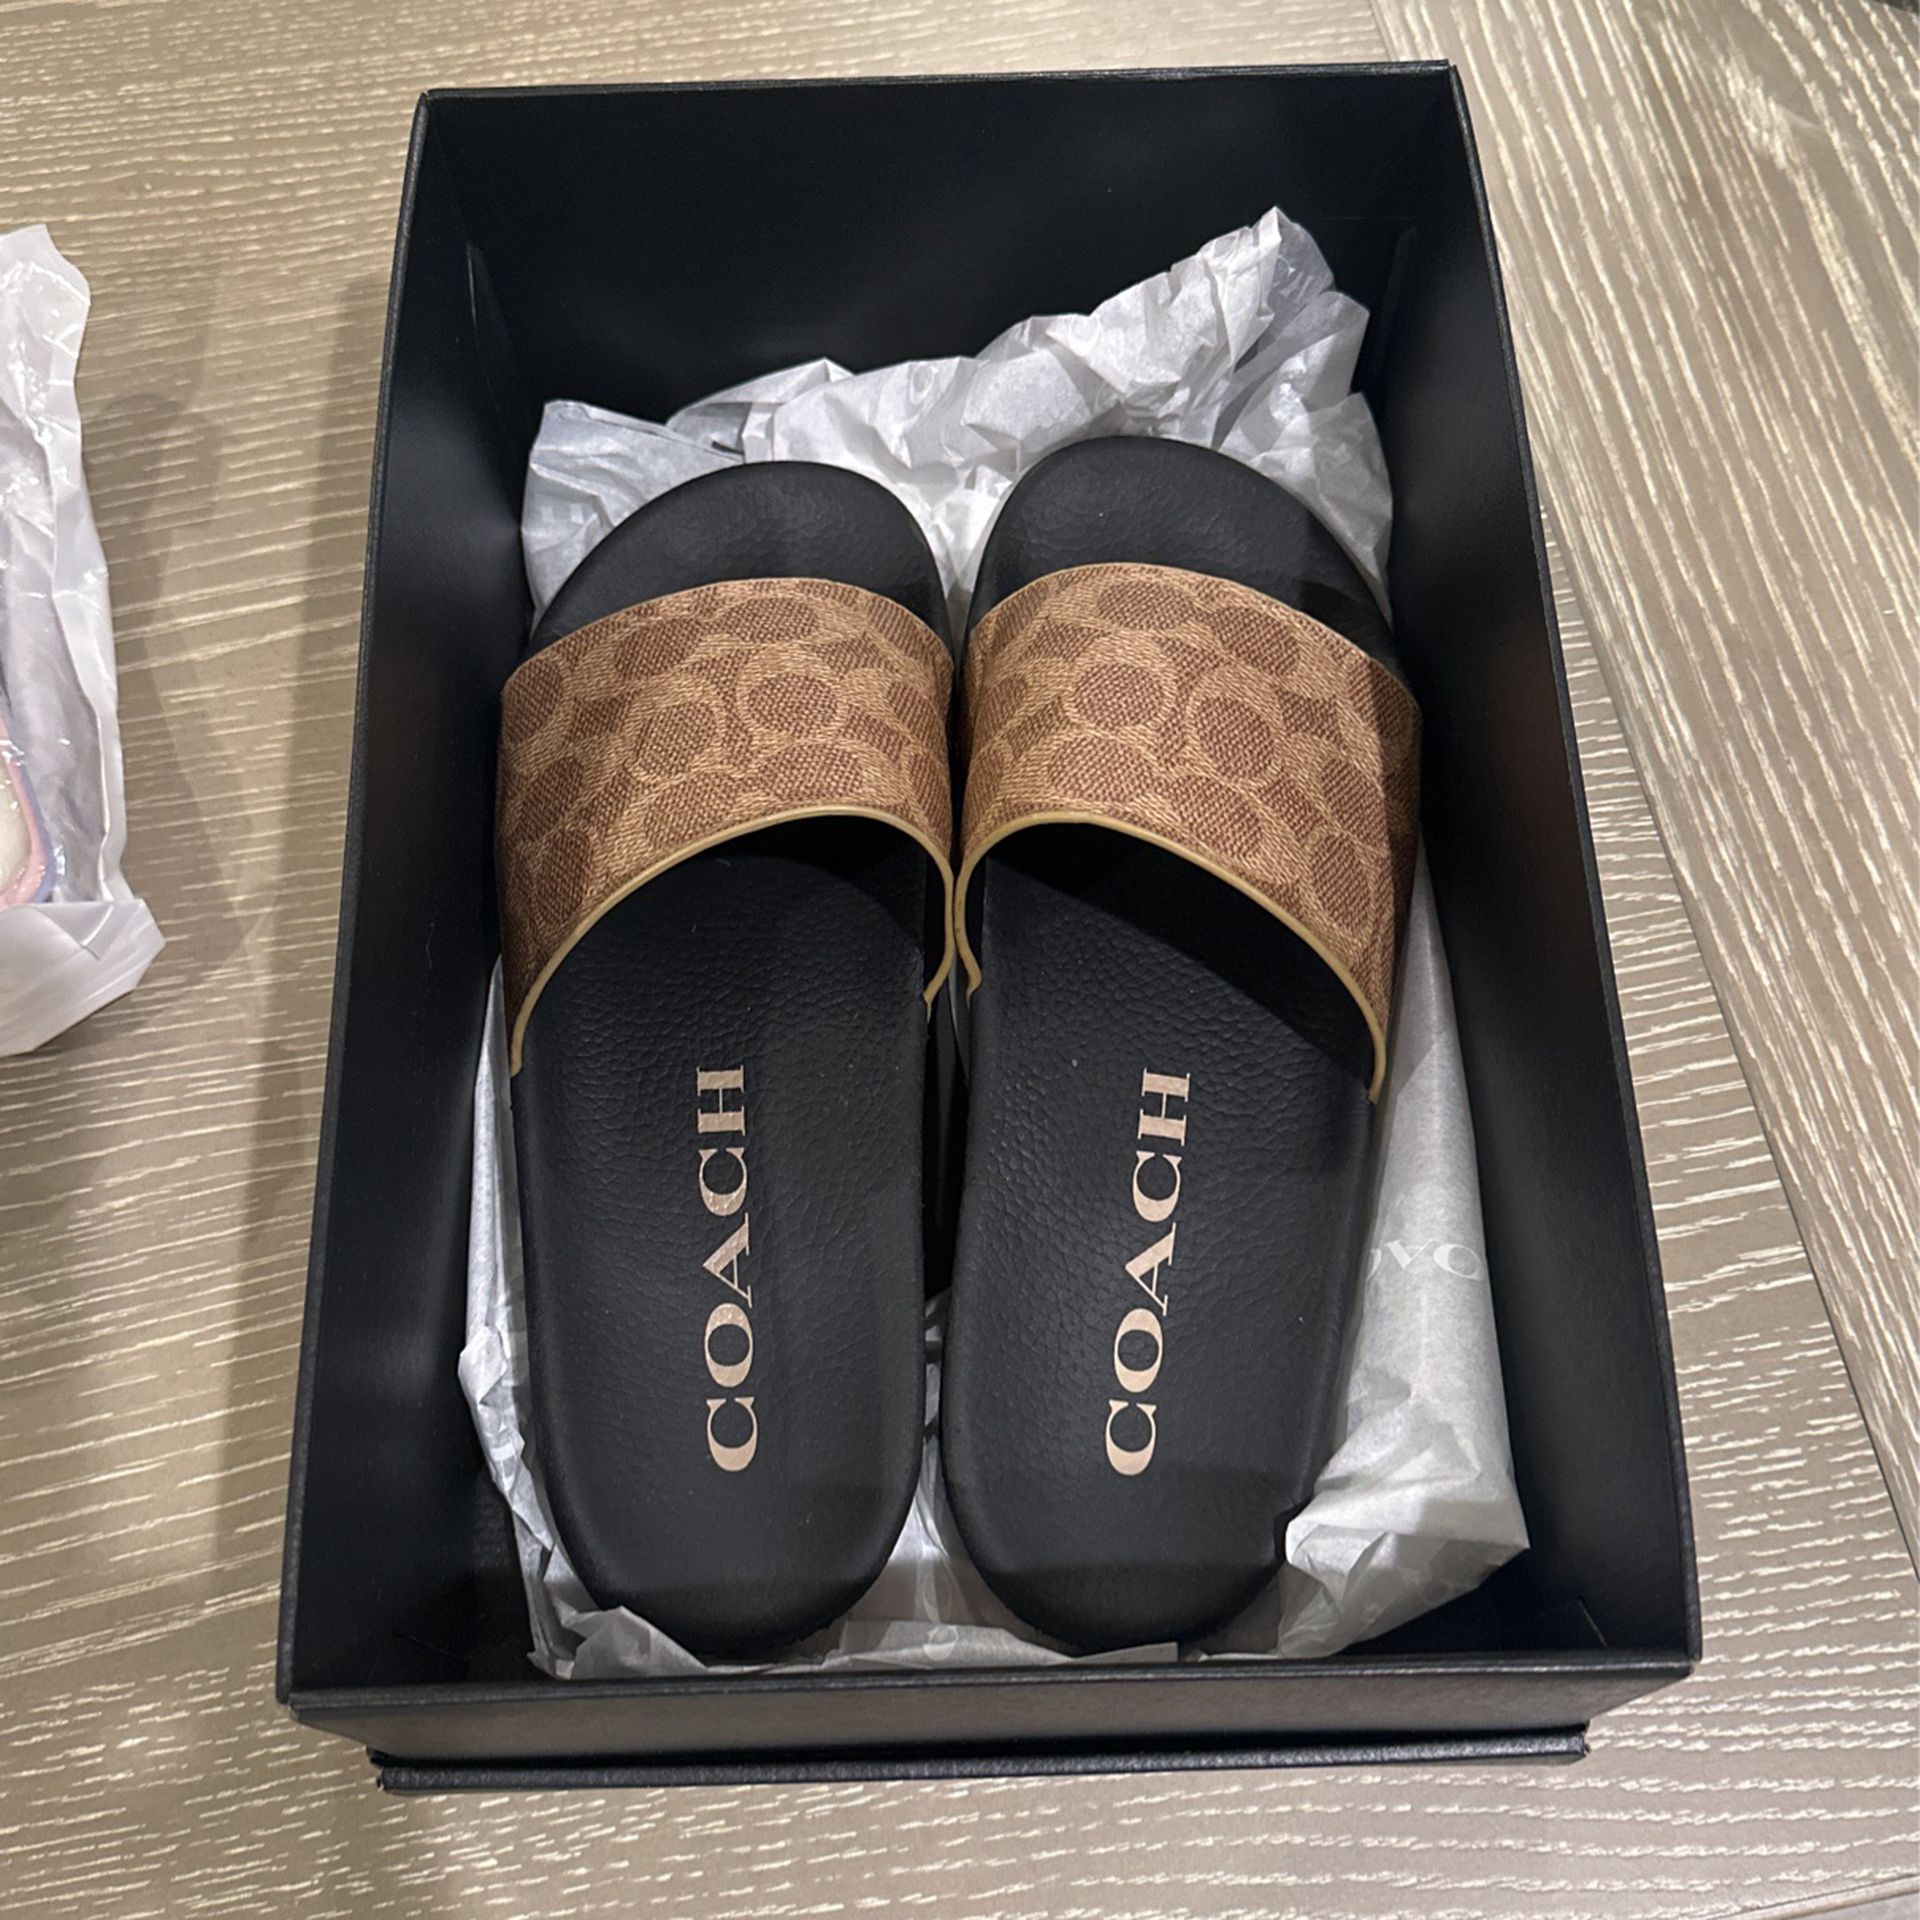 COACH slides - BRAND NEW - Women’s Size 8 for Sale in Glendale, CA ...